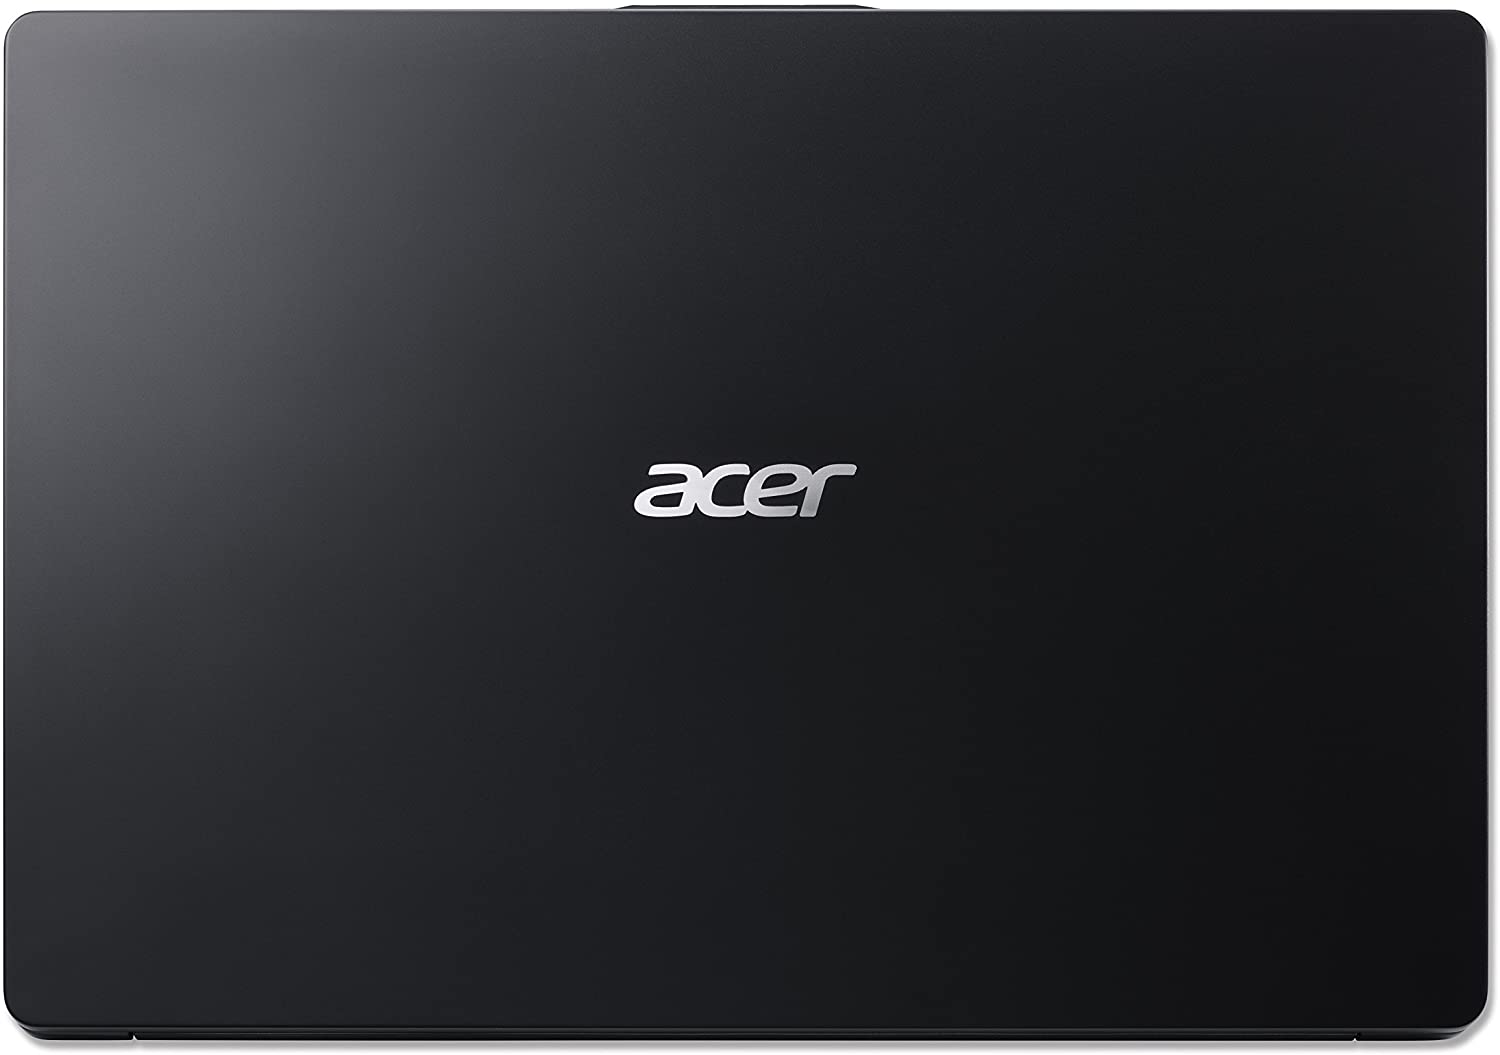 Acer Swift 1 (SF114-32) - Specs, Tests, and Prices | LaptopMedia 